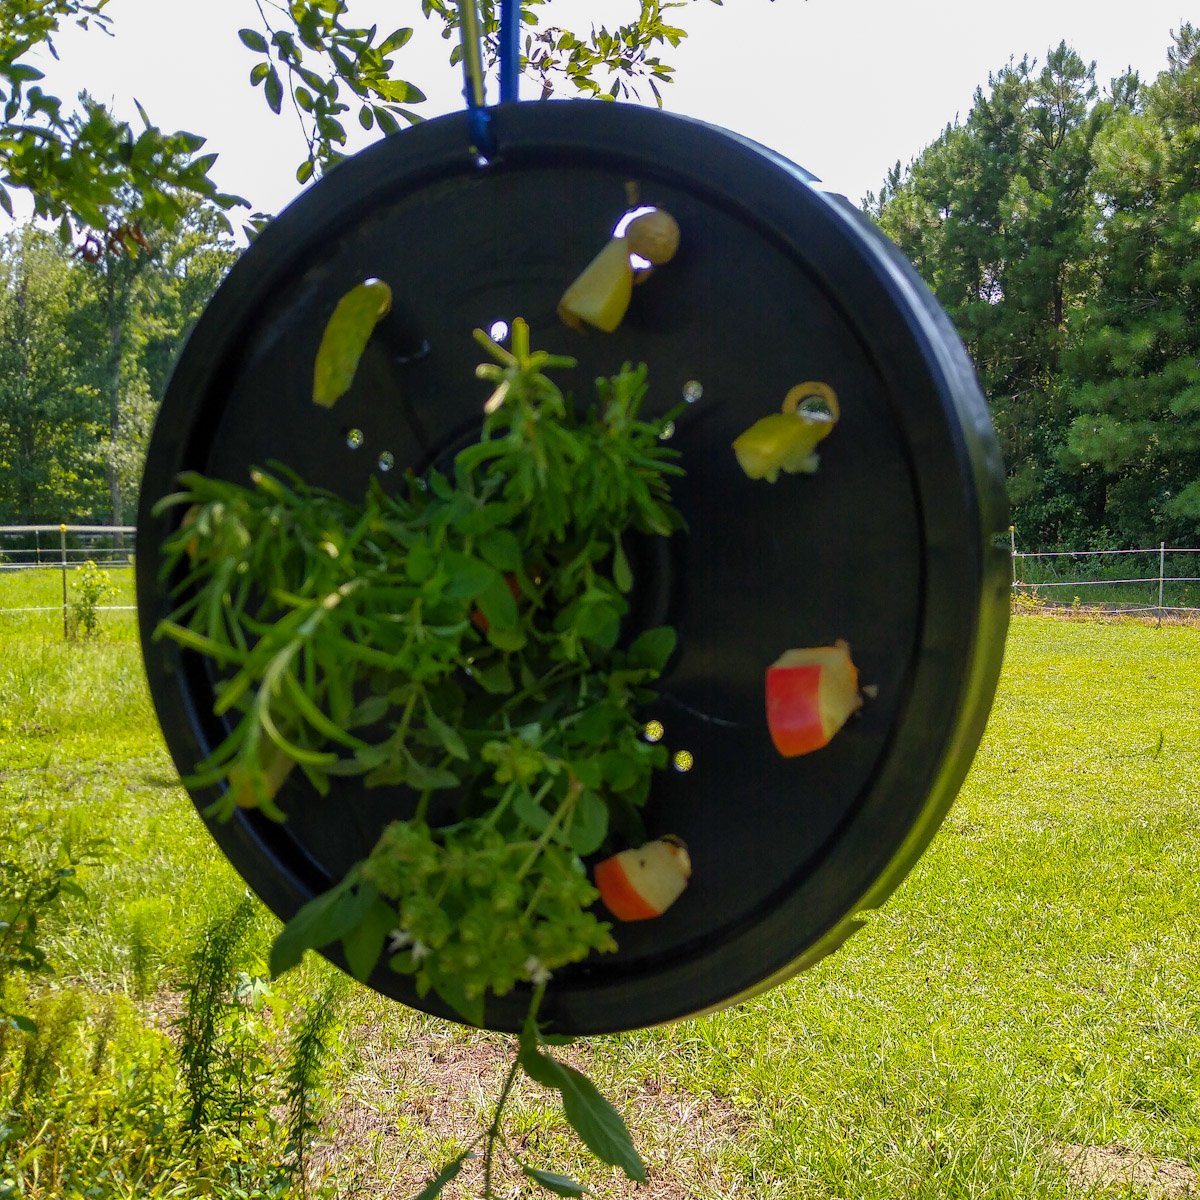 The bucket lid horse enrichment with apples, cucumbers, rosemary, oregano, and mint hanging from a tree.